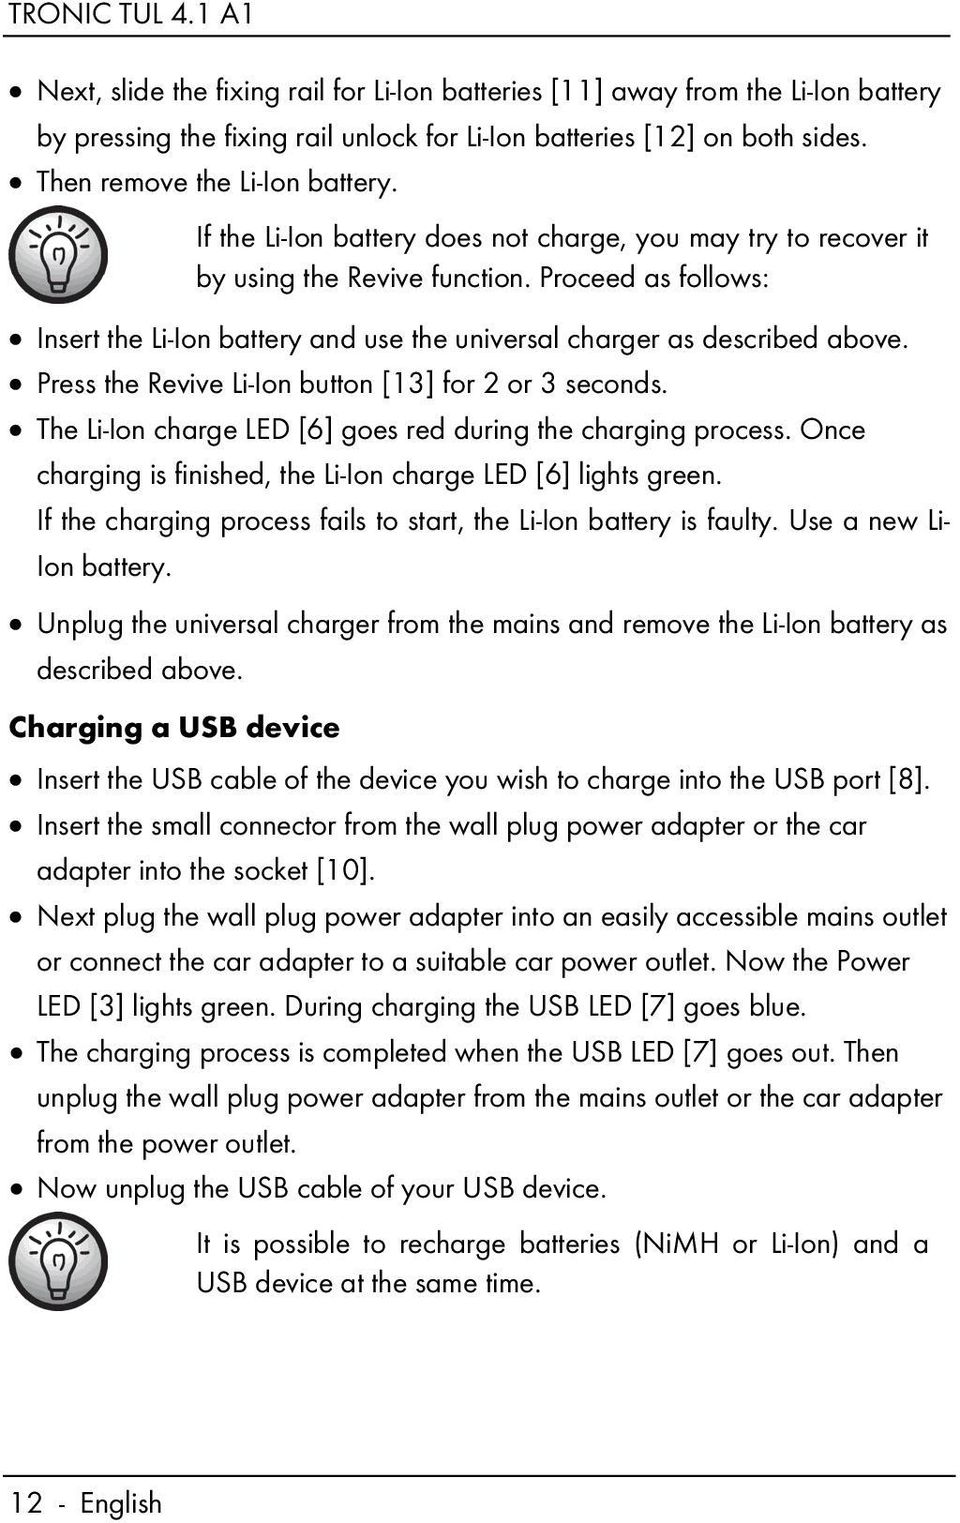 Press the Revive Li-Ion button [13] for 2 or 3 seconds. The Li-Ion charge LED [6] goes red during the charging process. Once charging is finished, the Li-Ion charge LED [6] lights green.